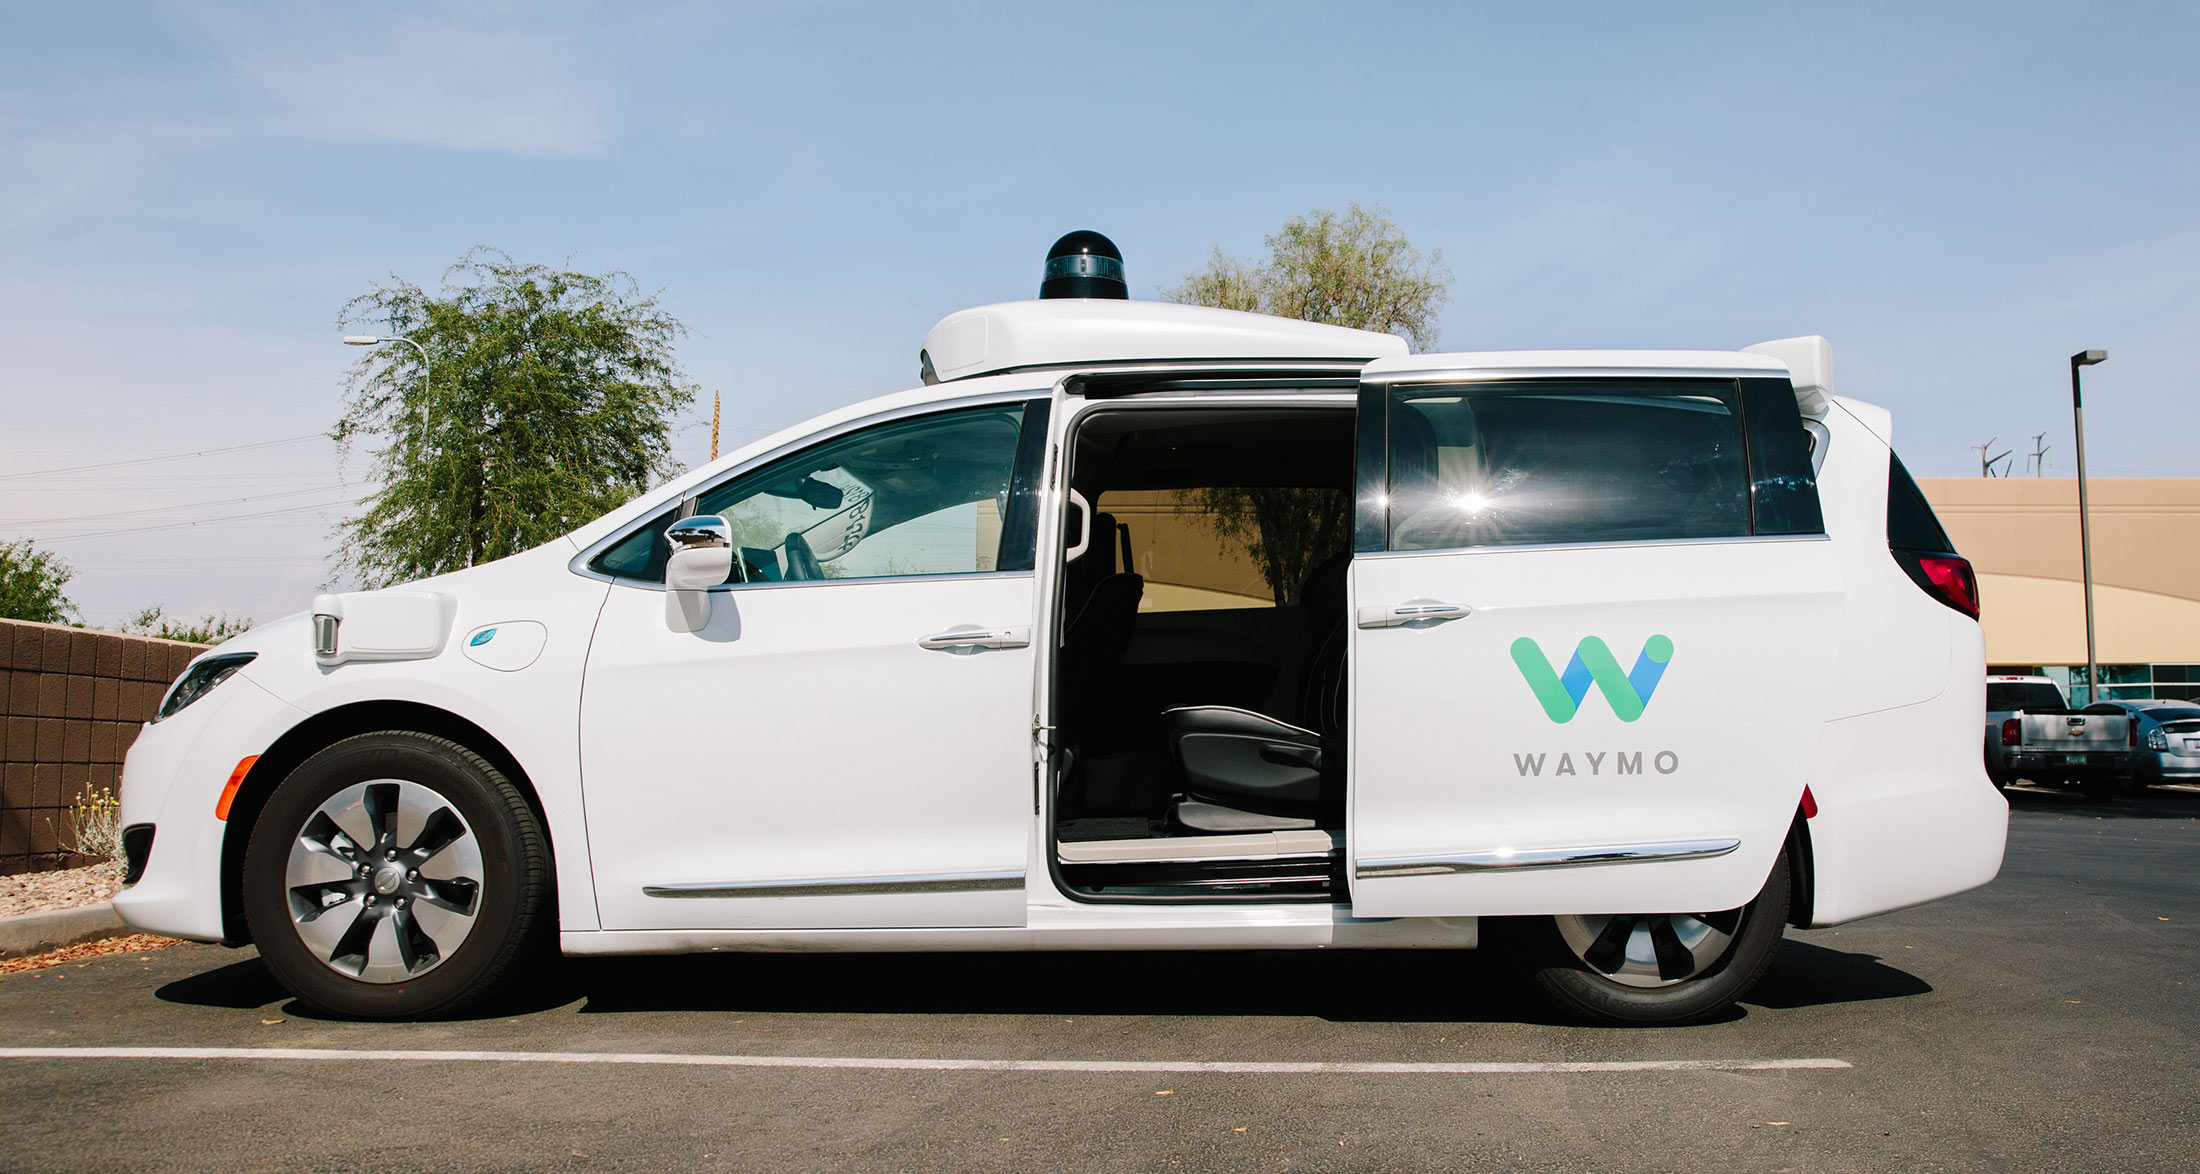 Meet the Future How Waymo's Self-Driving Taxis Are Changing Daily Commutes in Big Cities